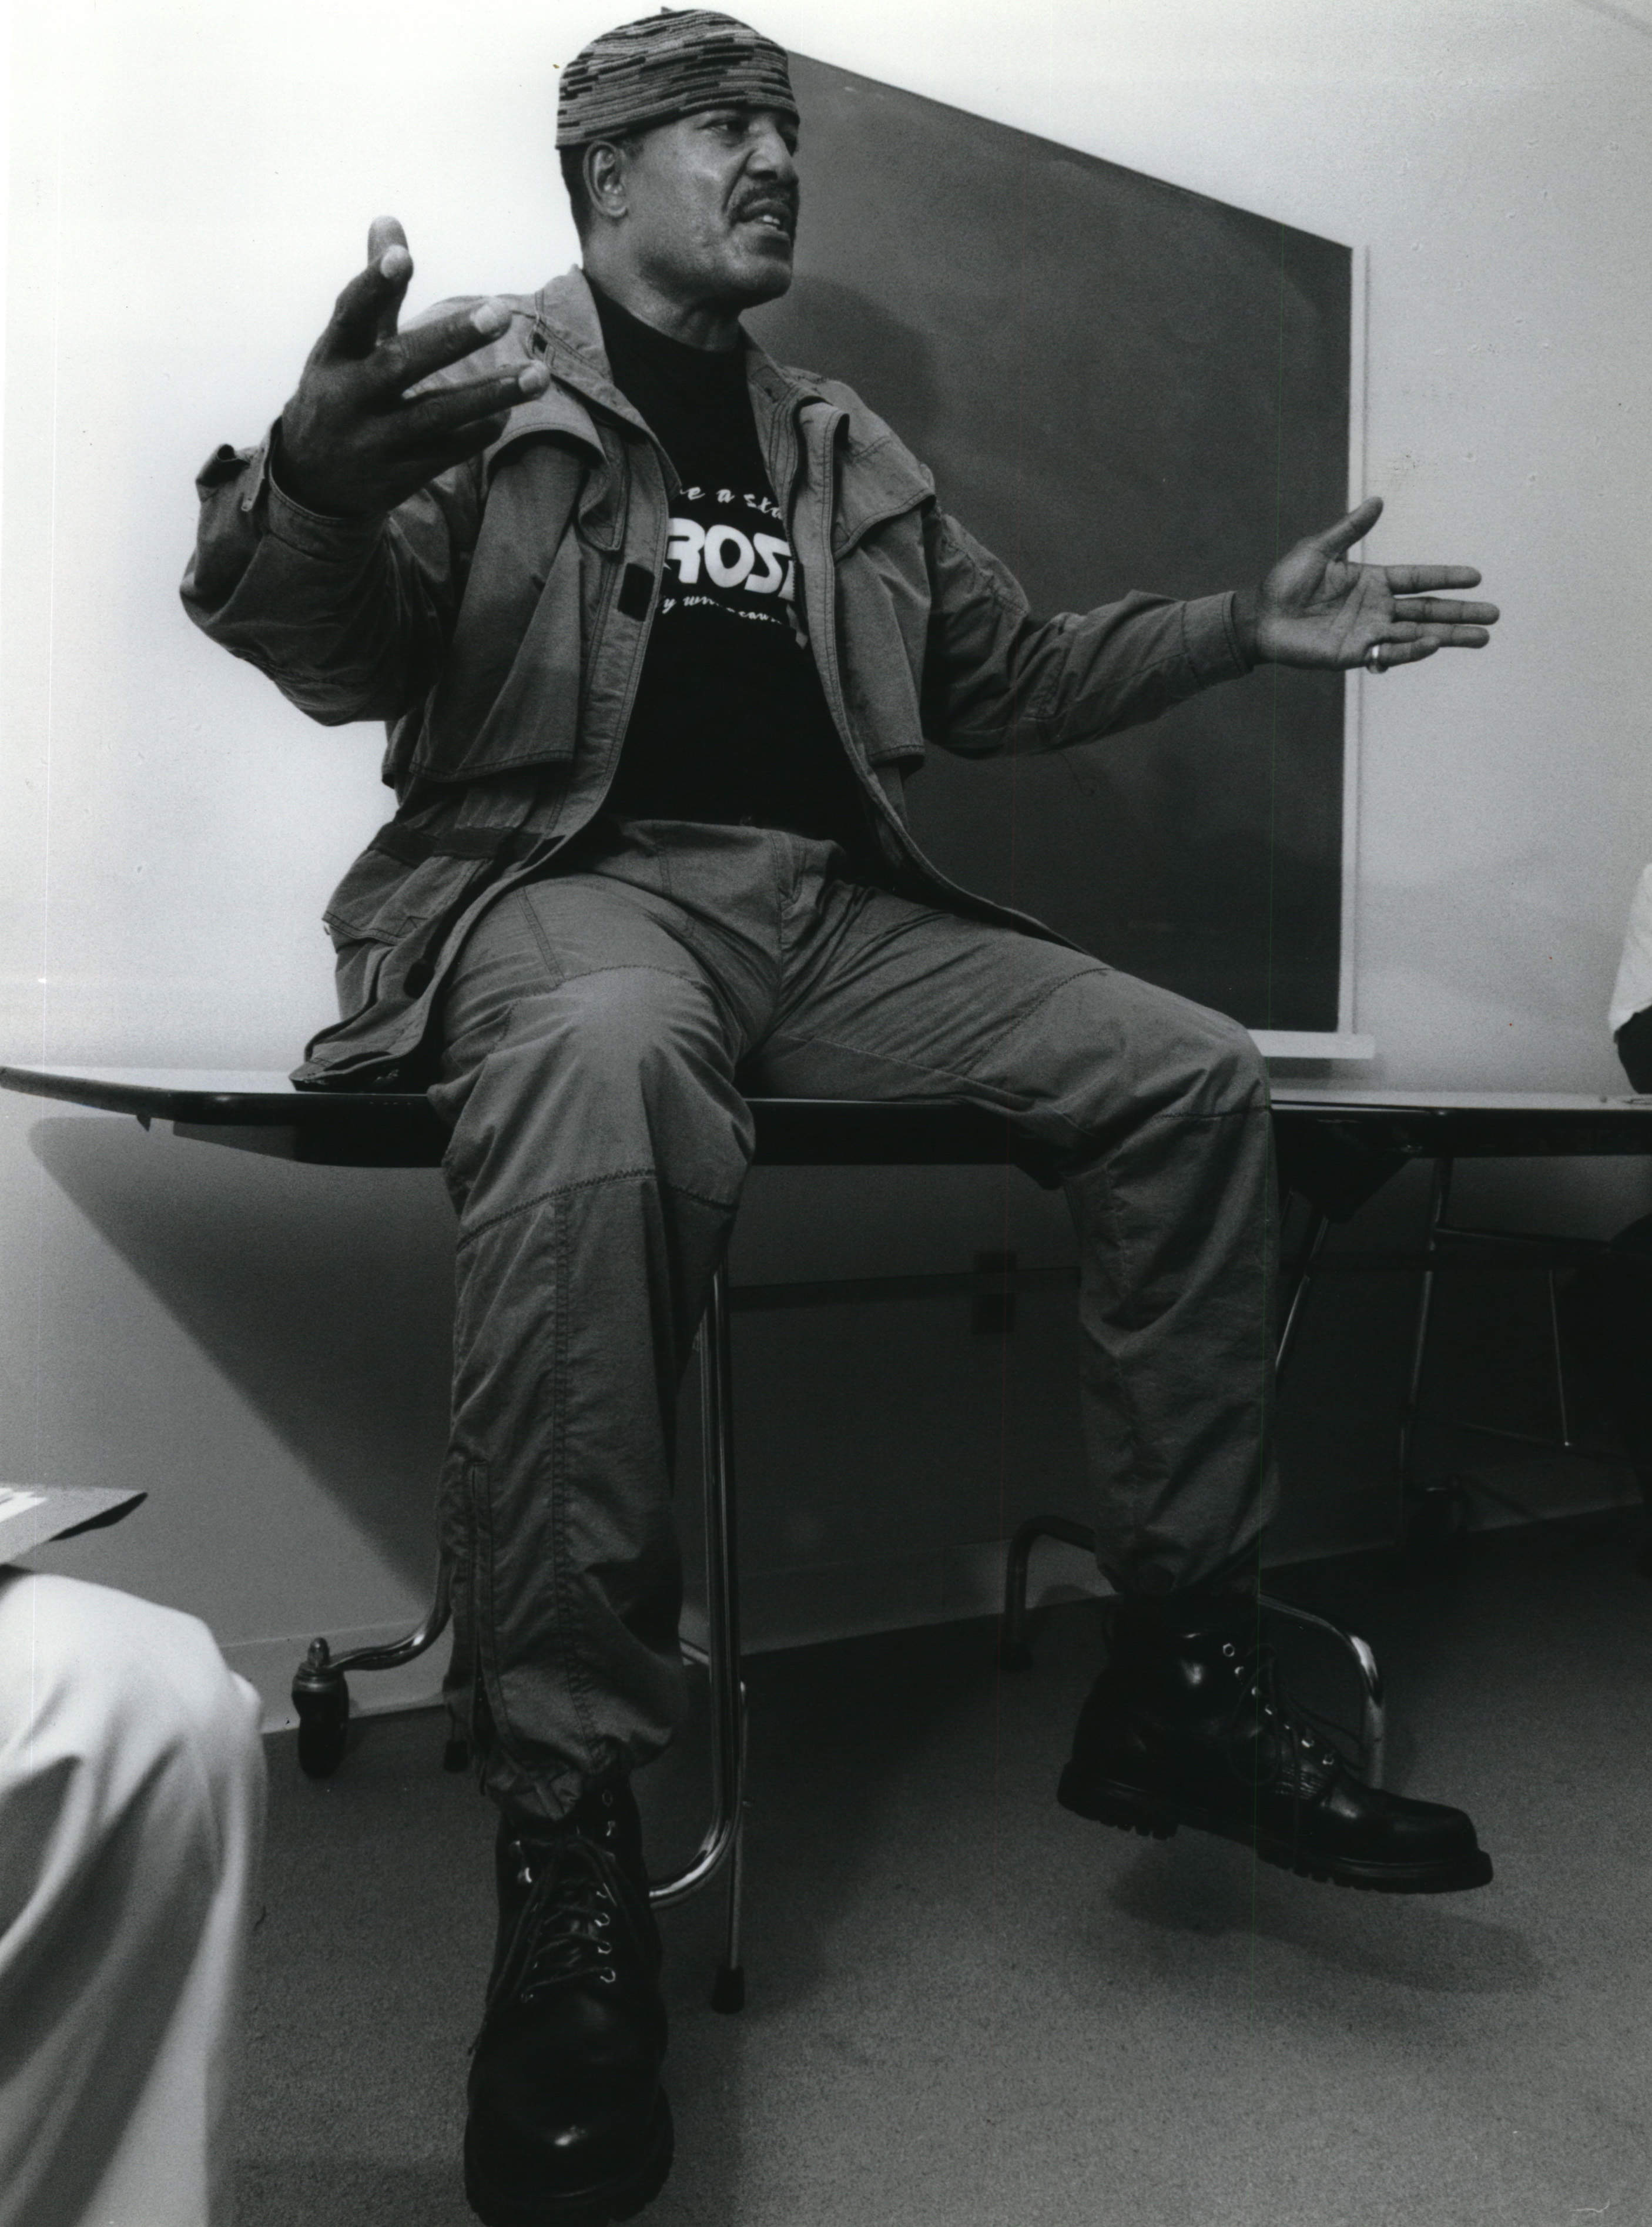 Former Syracuse University Football Player Jim Brown talking to SU students and minority alumnae in the Schine Student Center, Syracuse University, on gangs in Los Angeles that he has worked with. Photo was taken in 1992.